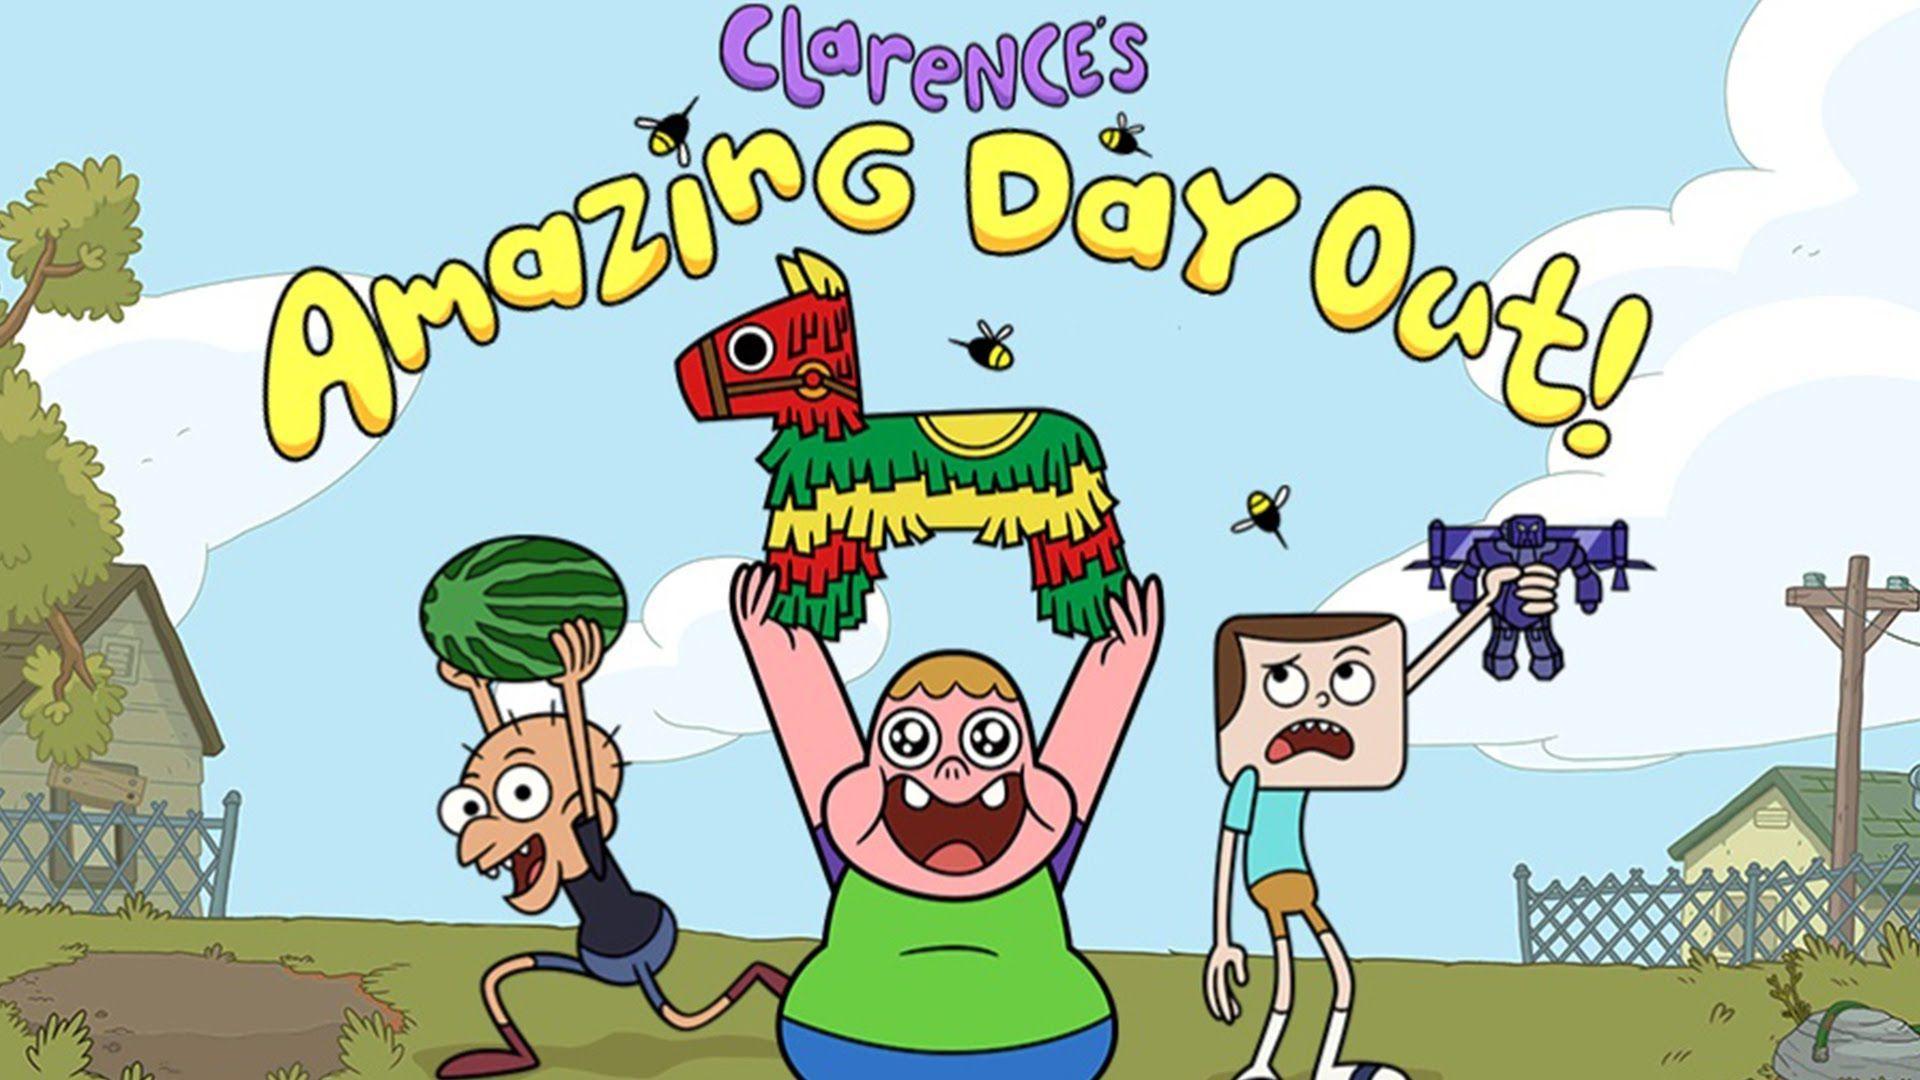 Let's Look At: Clarence's Amazing Day Out for iPhone